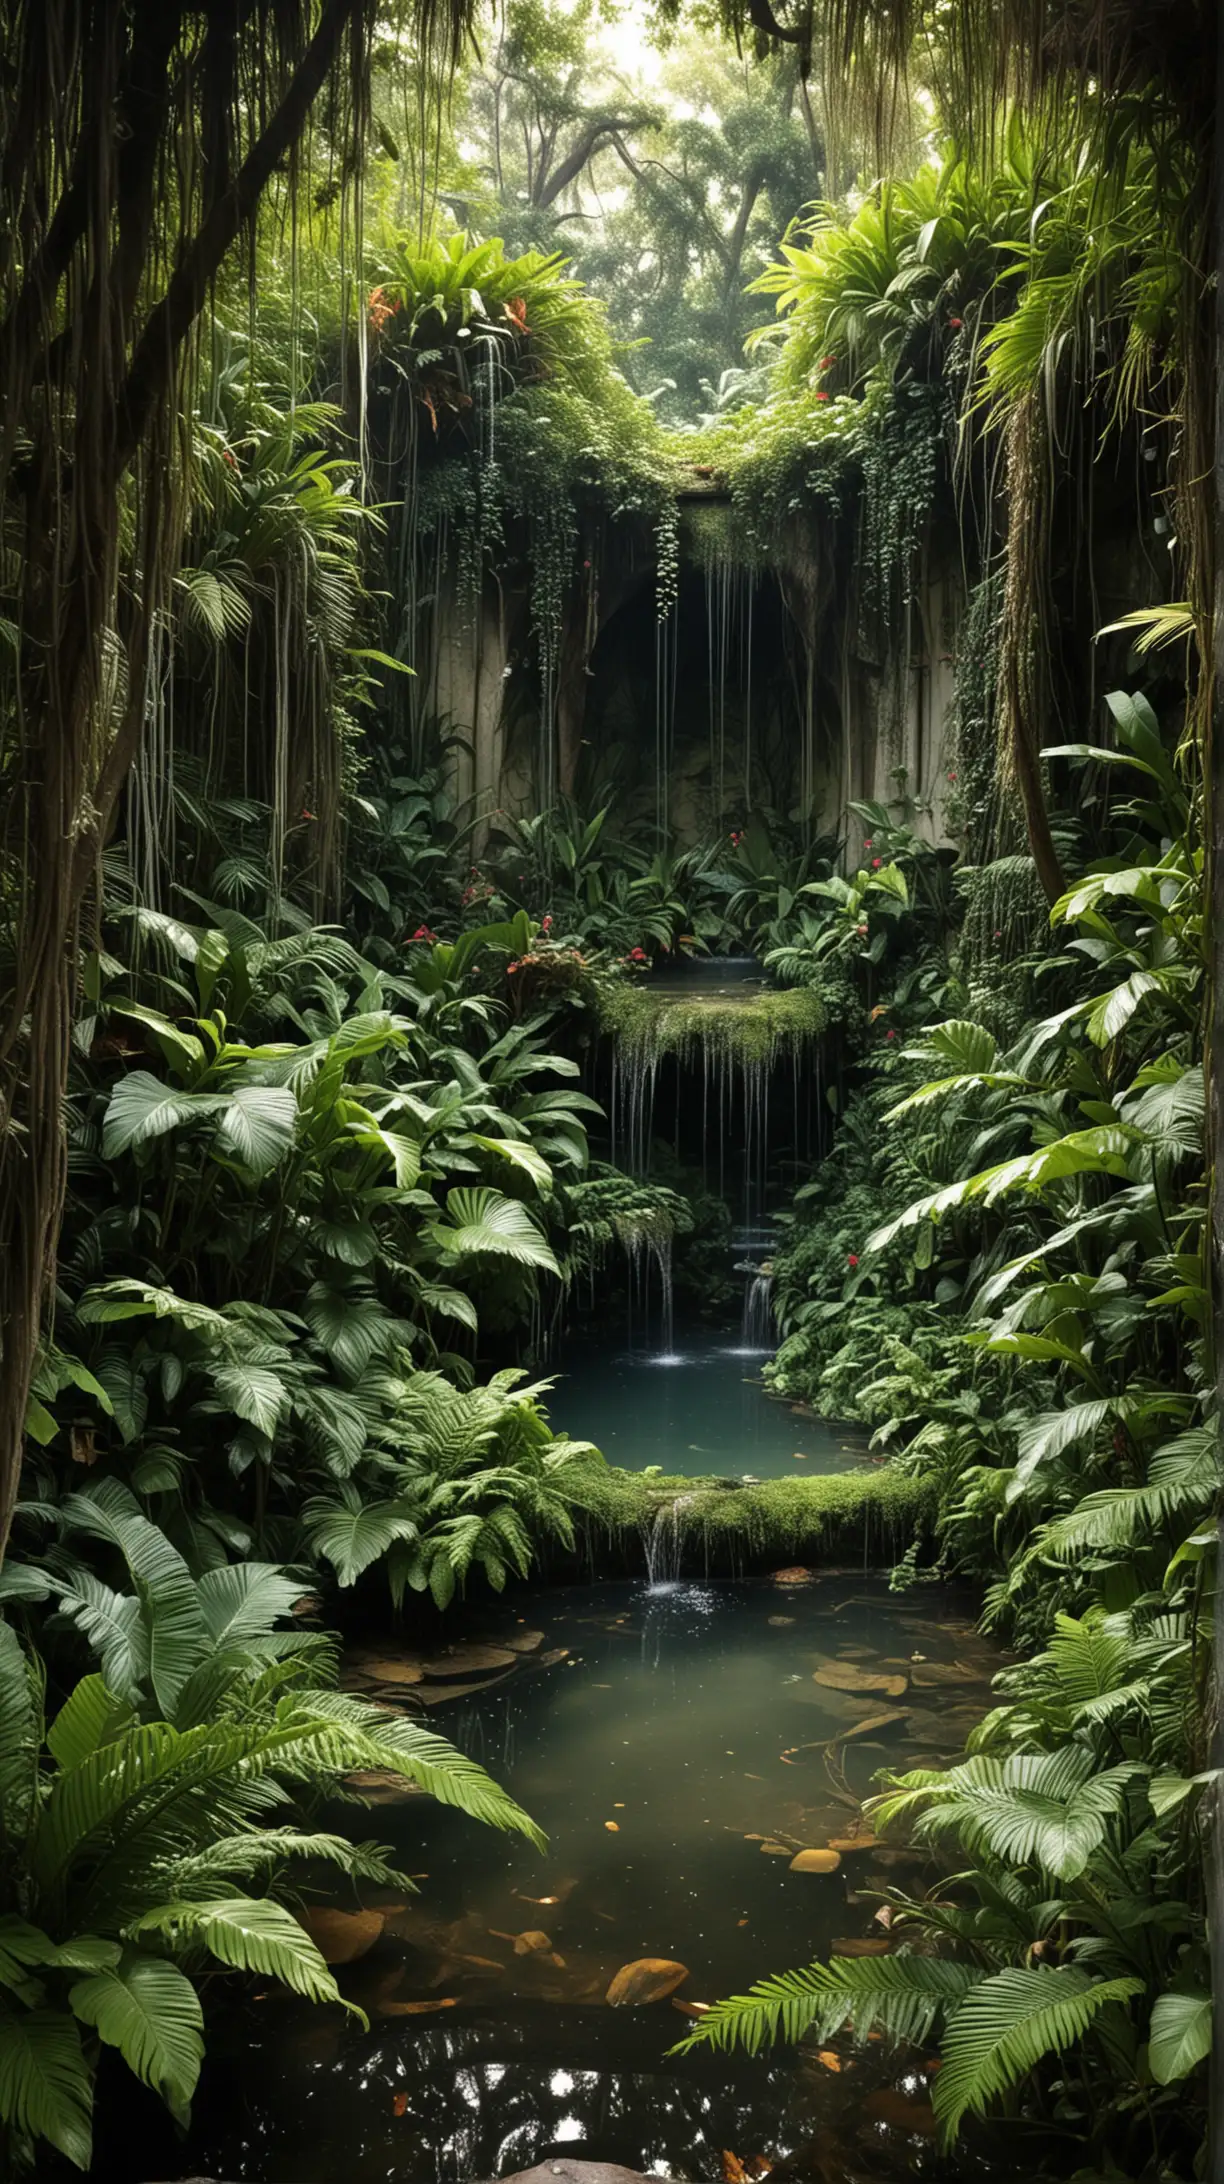 Fountain of Youth, nestled in a lush, overgrown jungle.  make look mysterious 


